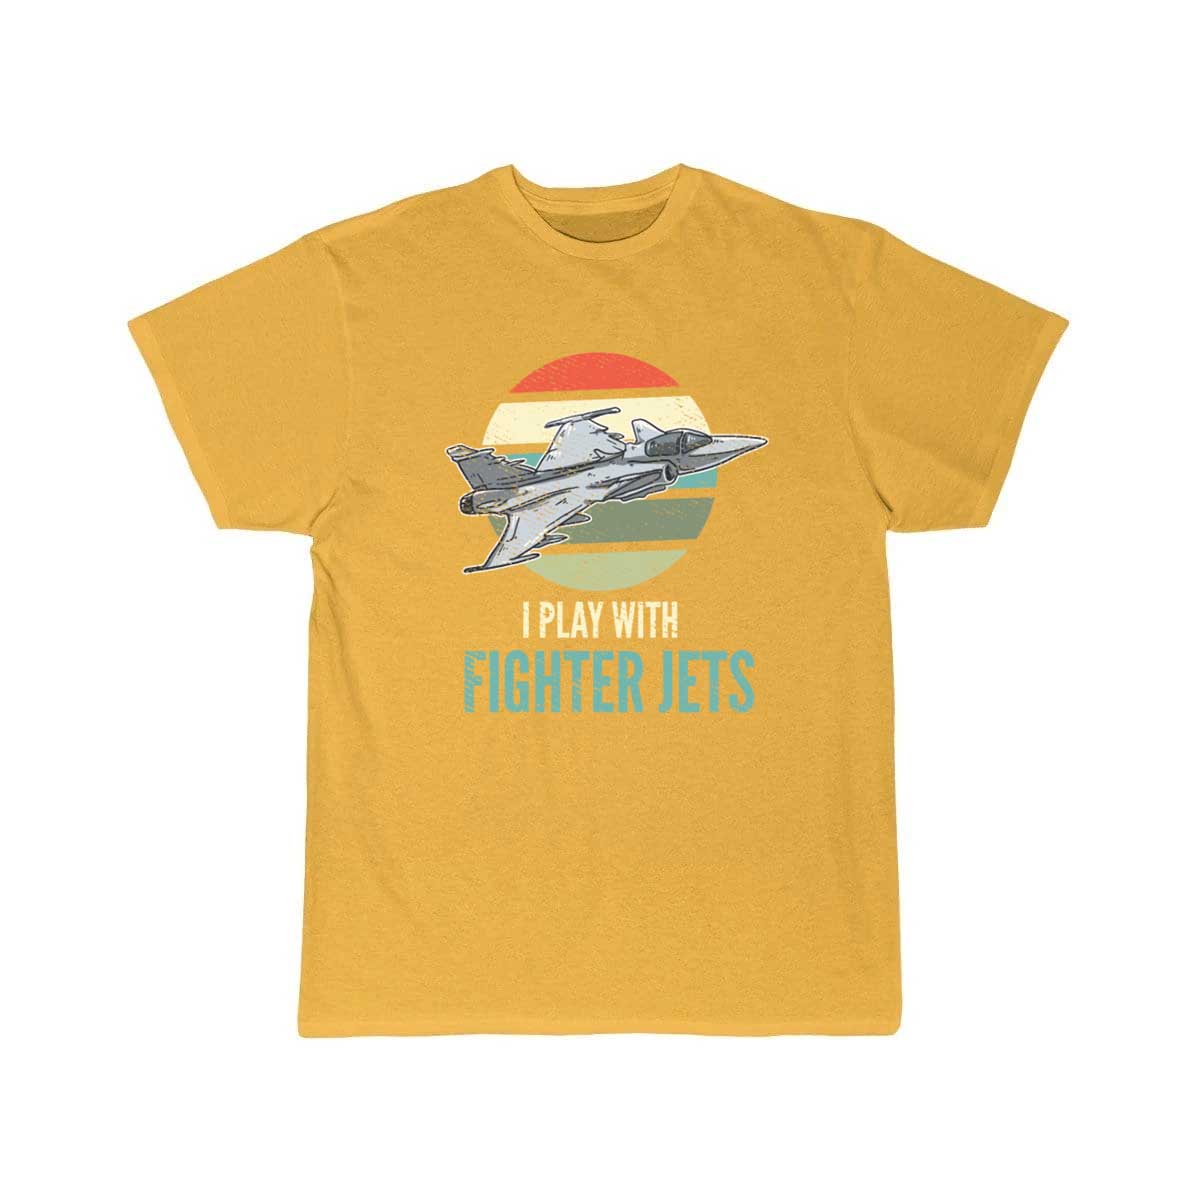 Fighter Jets Vintage Aircraft Airplane Pilot T Shirt THE AV8R